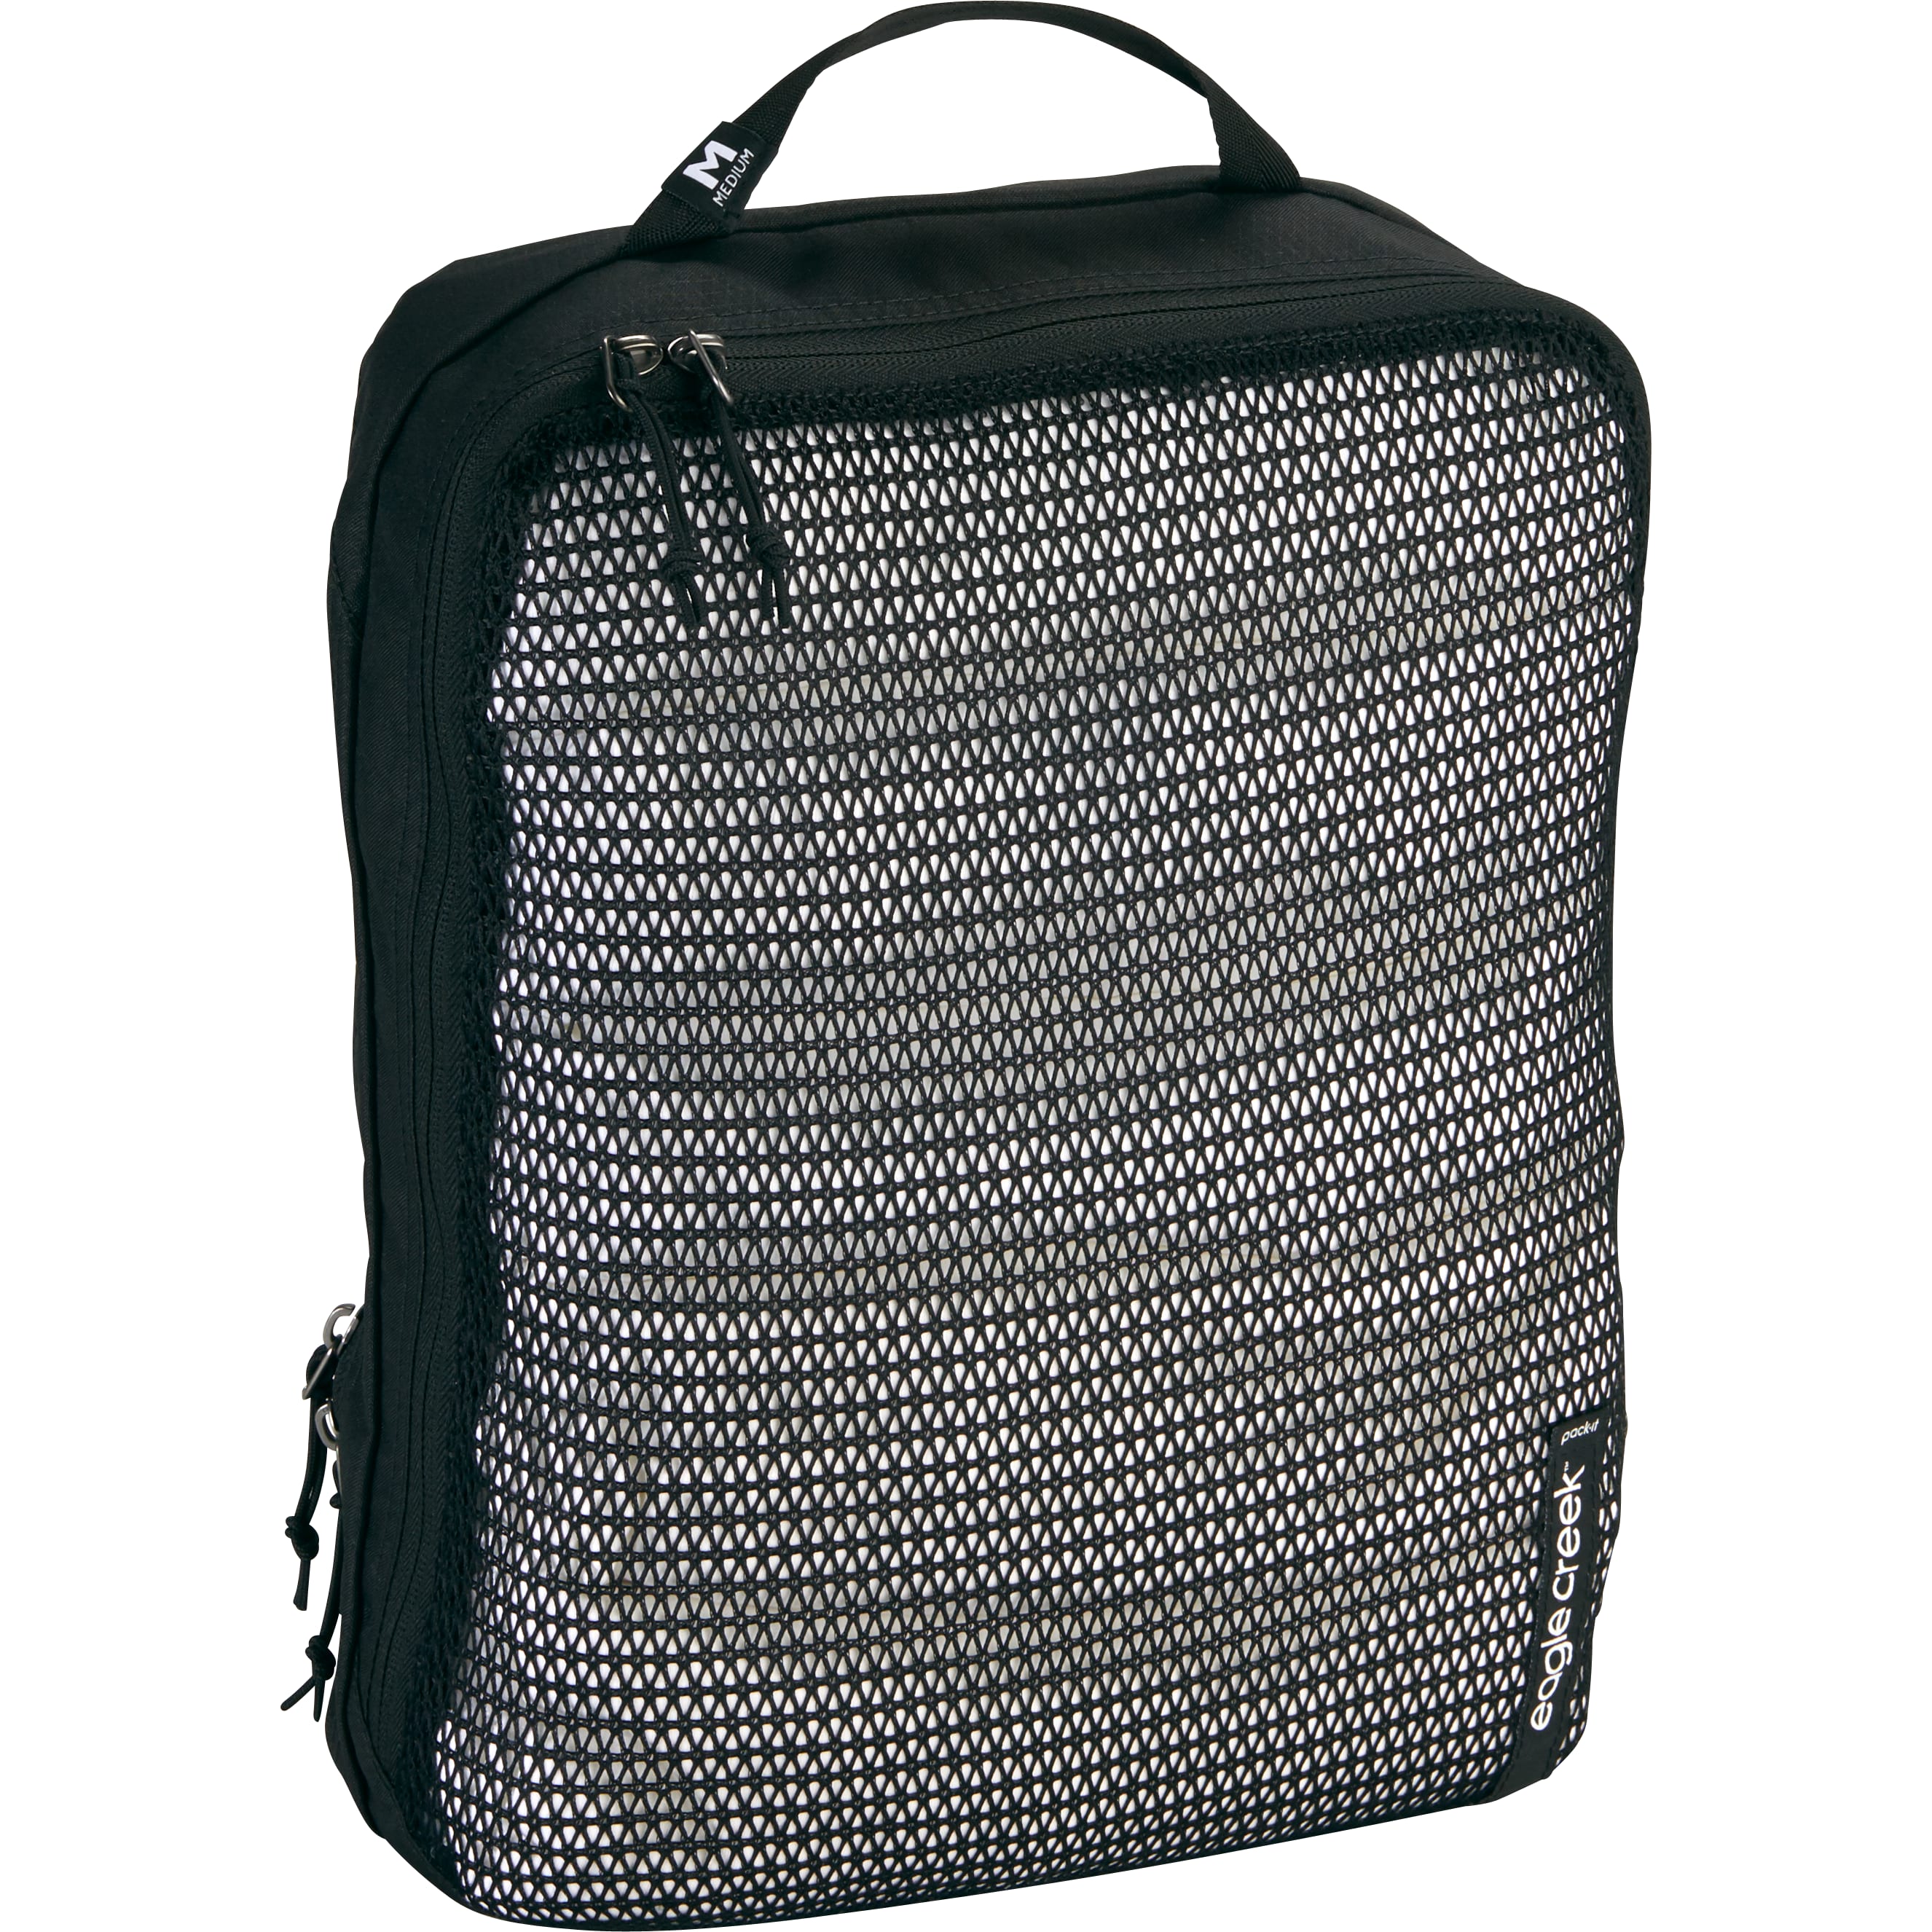 Pack-It Reveal Clean/Dirty Cube M Black